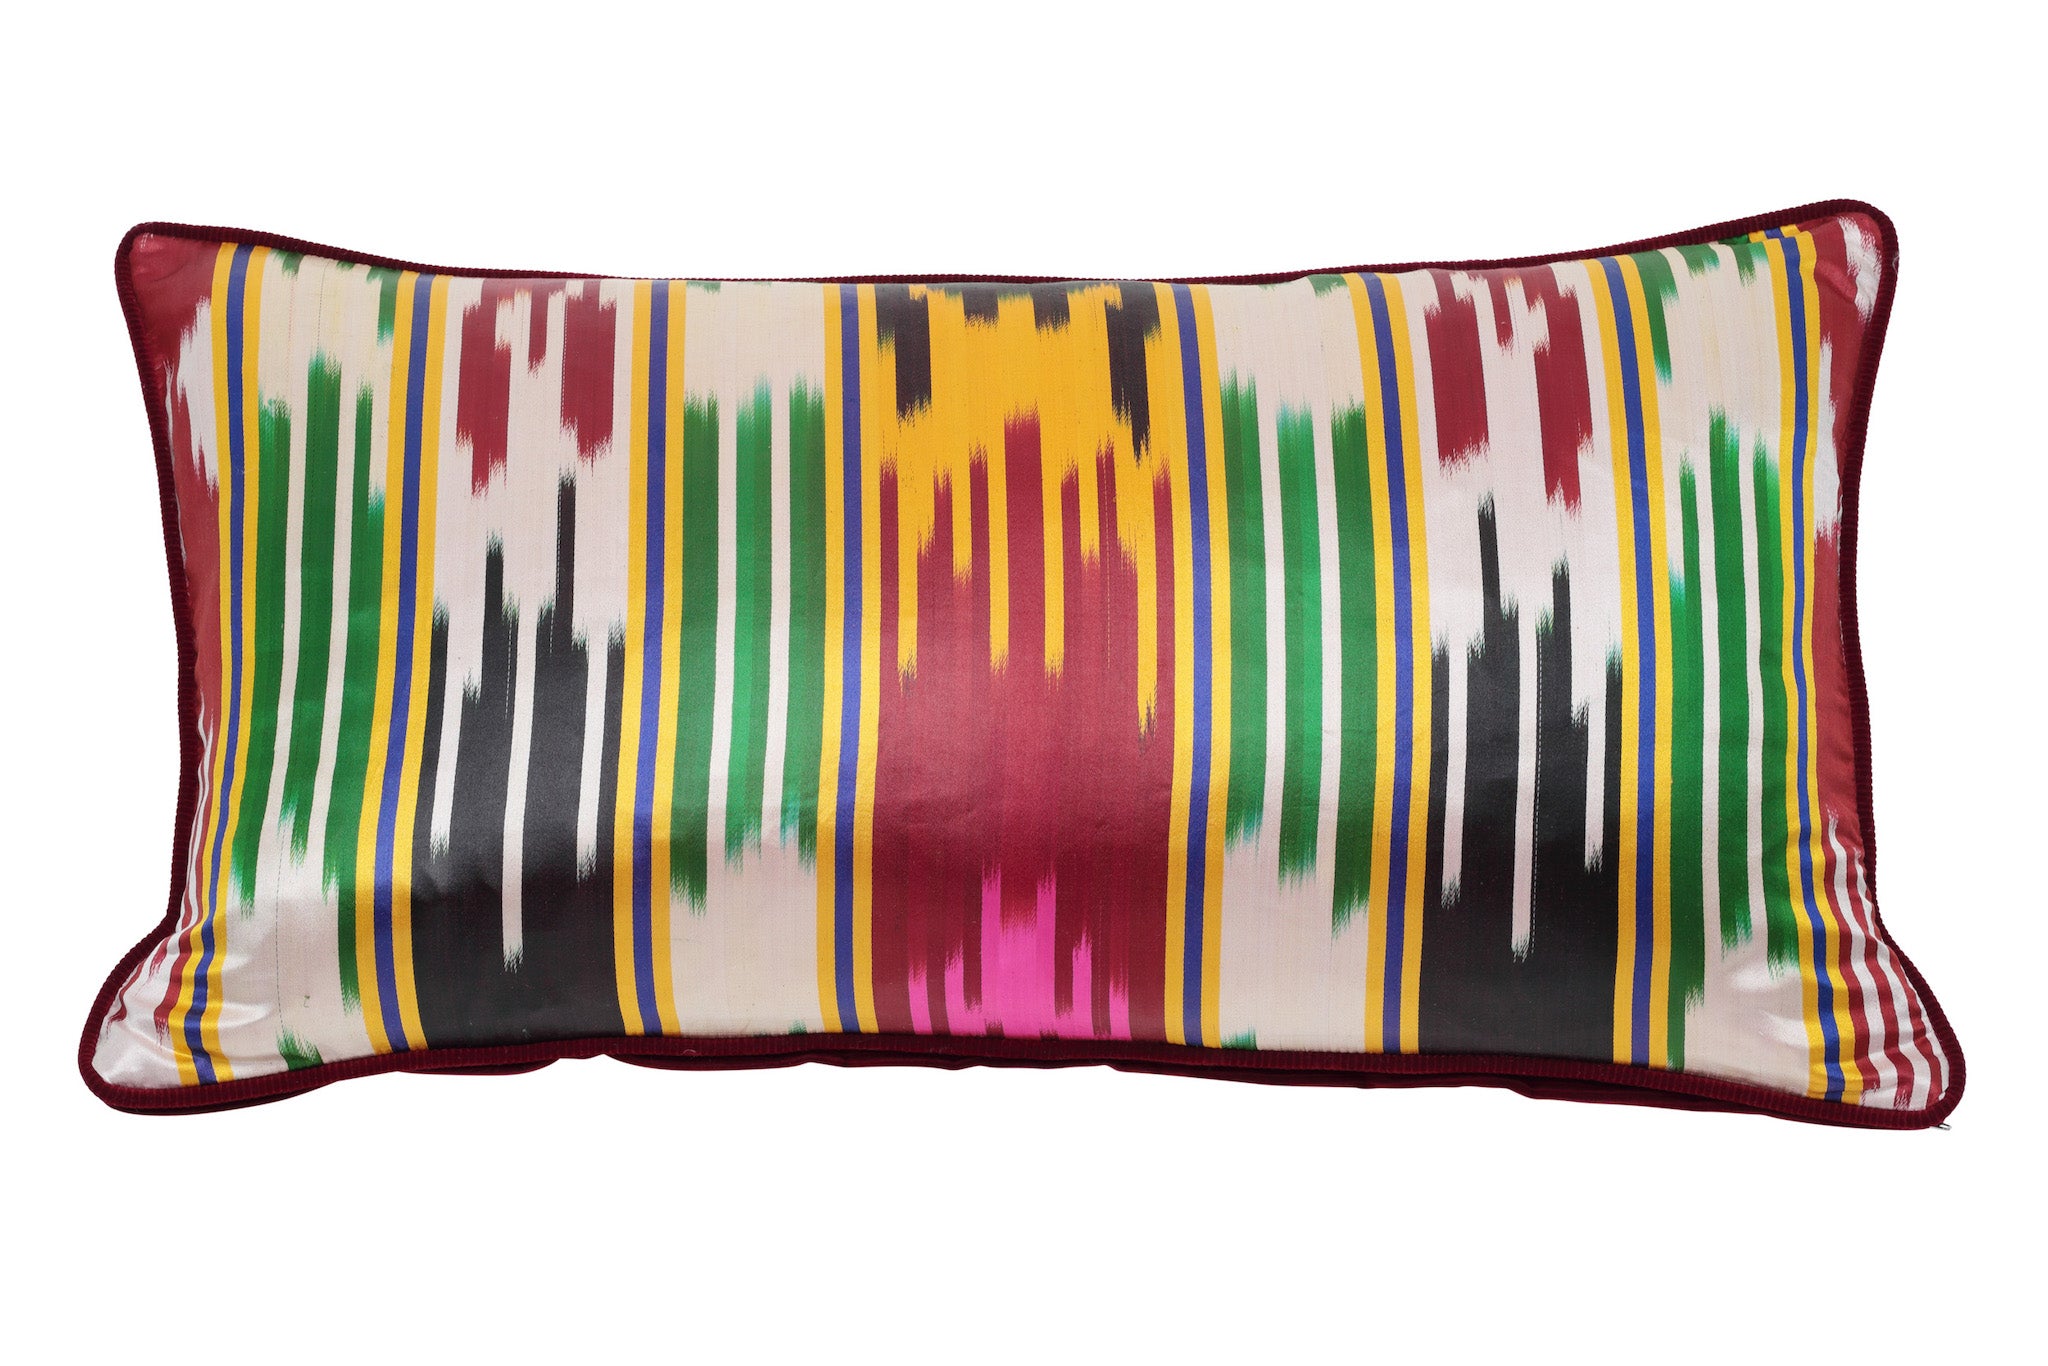 Burgundy Red, Green, Pink, White and Gold Patterned Silk Ikat Scatter Rectangle Cushion from Uzbekistan - FRONT